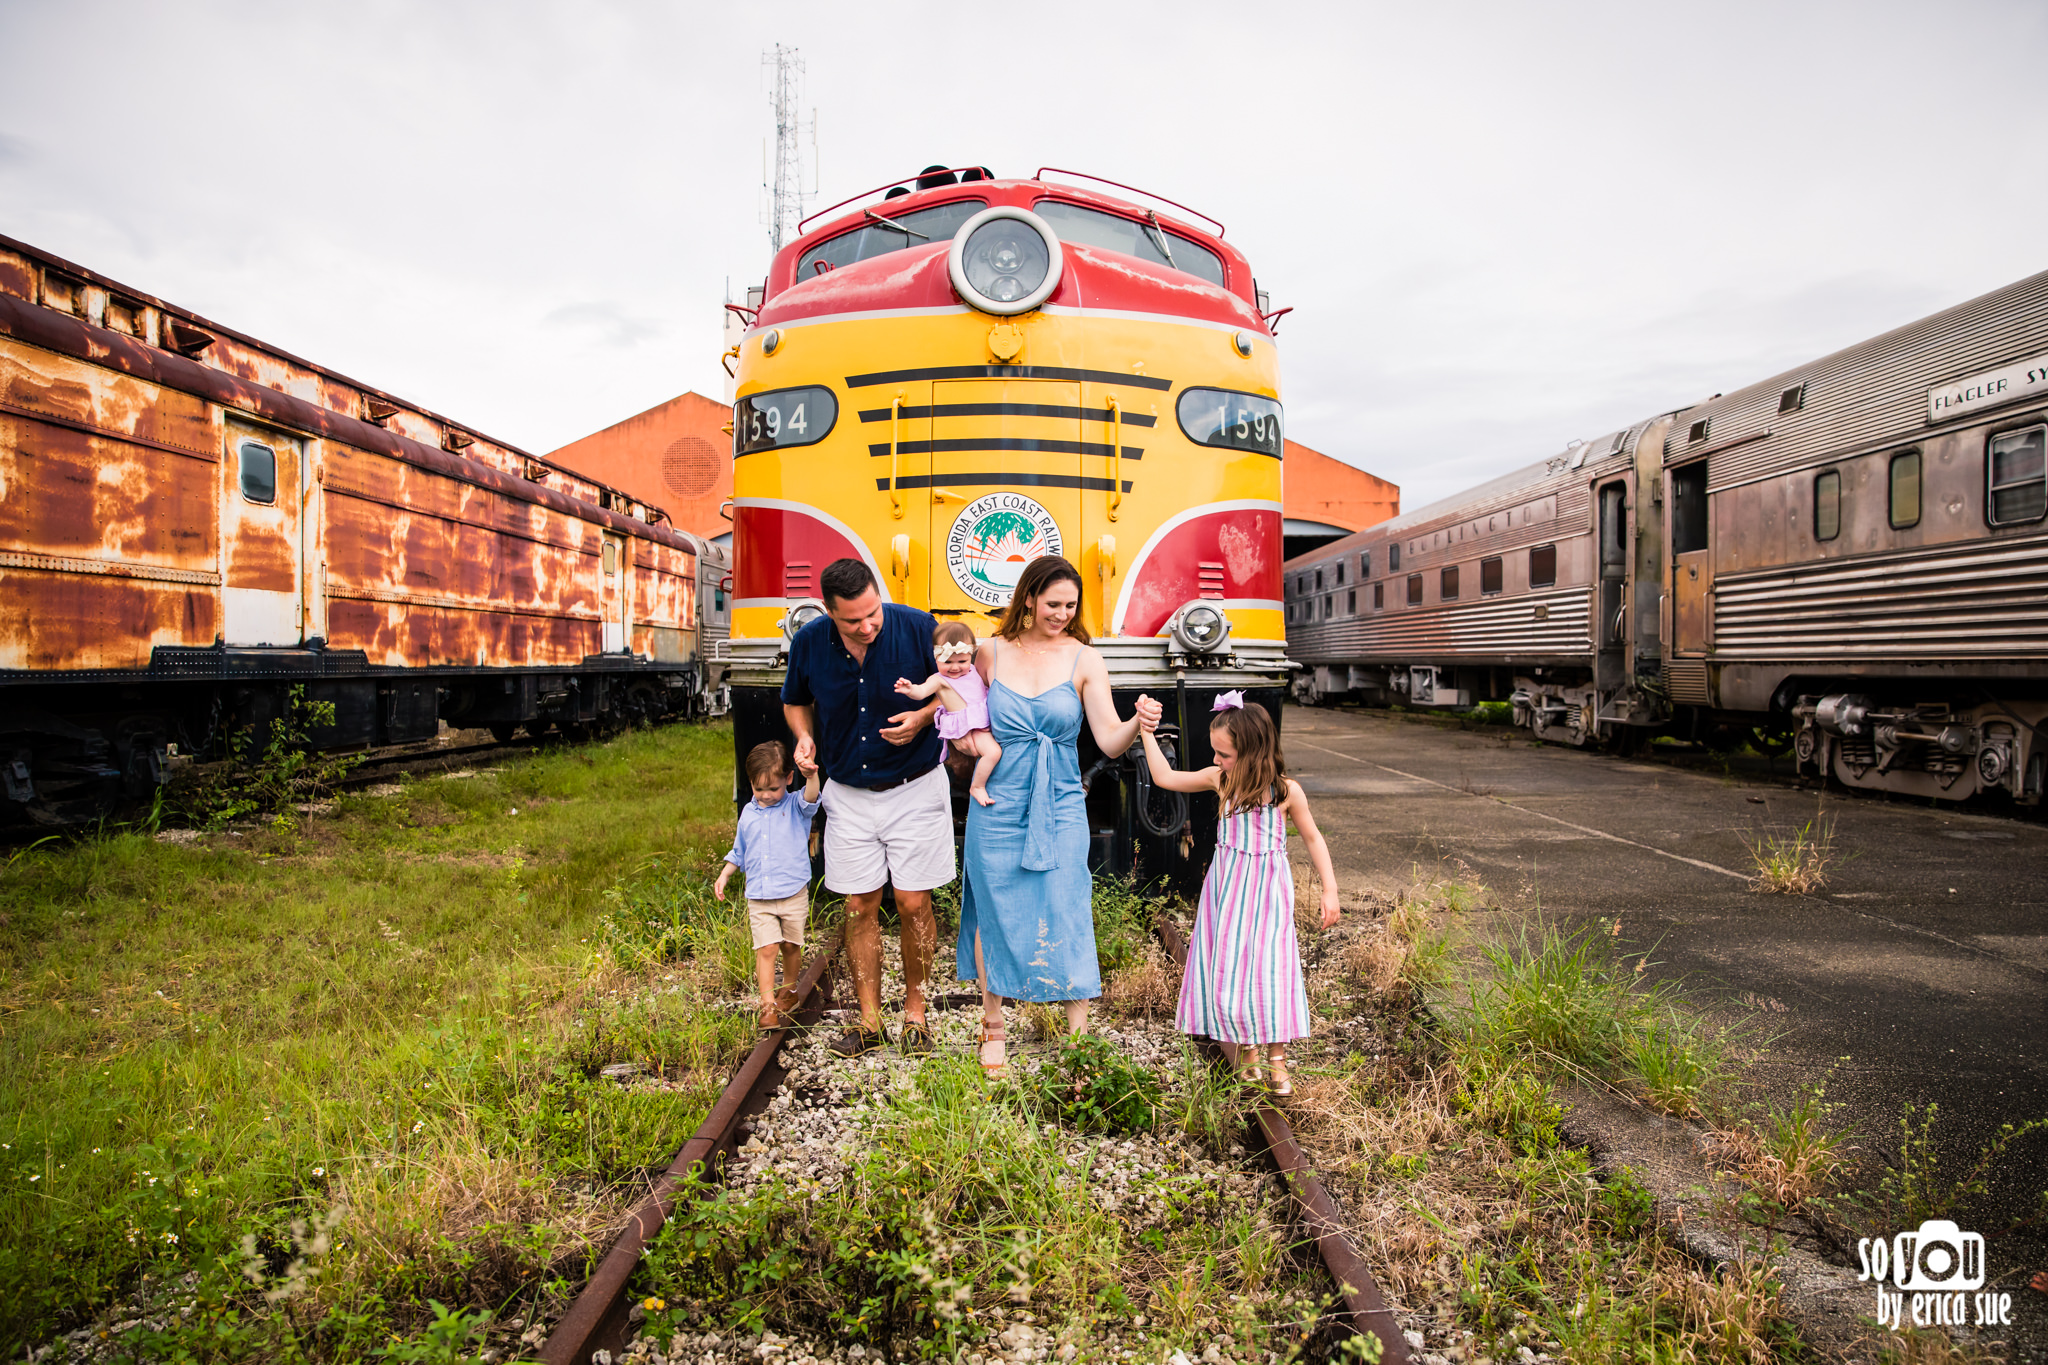 so-you-by-erica-sue-gold-coast-railroad-museum-miami-family-photo-shoot-session-7507.JPG